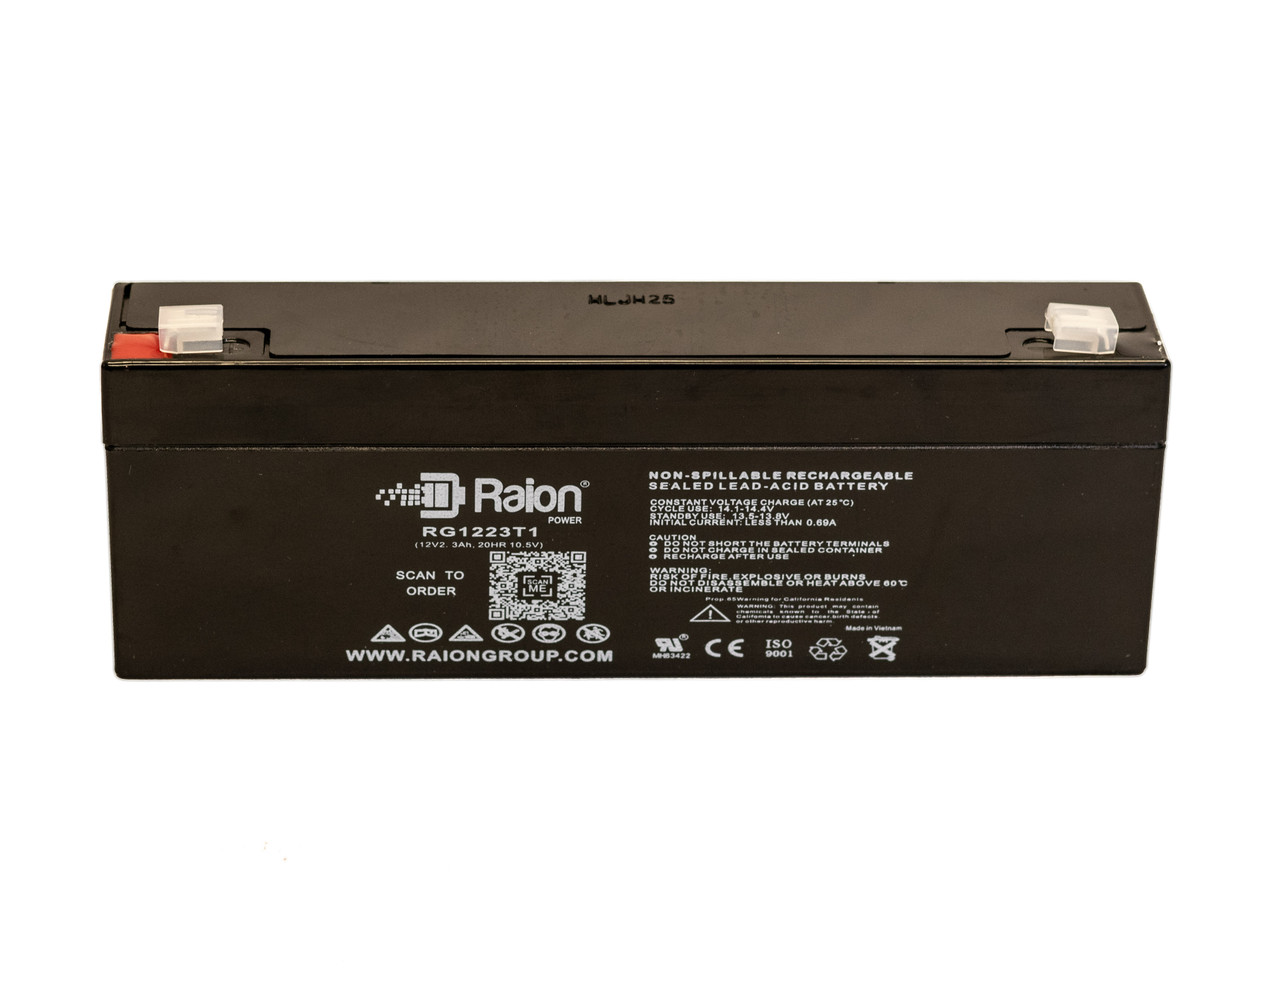 Raion Power 12V 2.3Ah SLA Battery With T1 Terminals For Ivac Medical Systems 302787